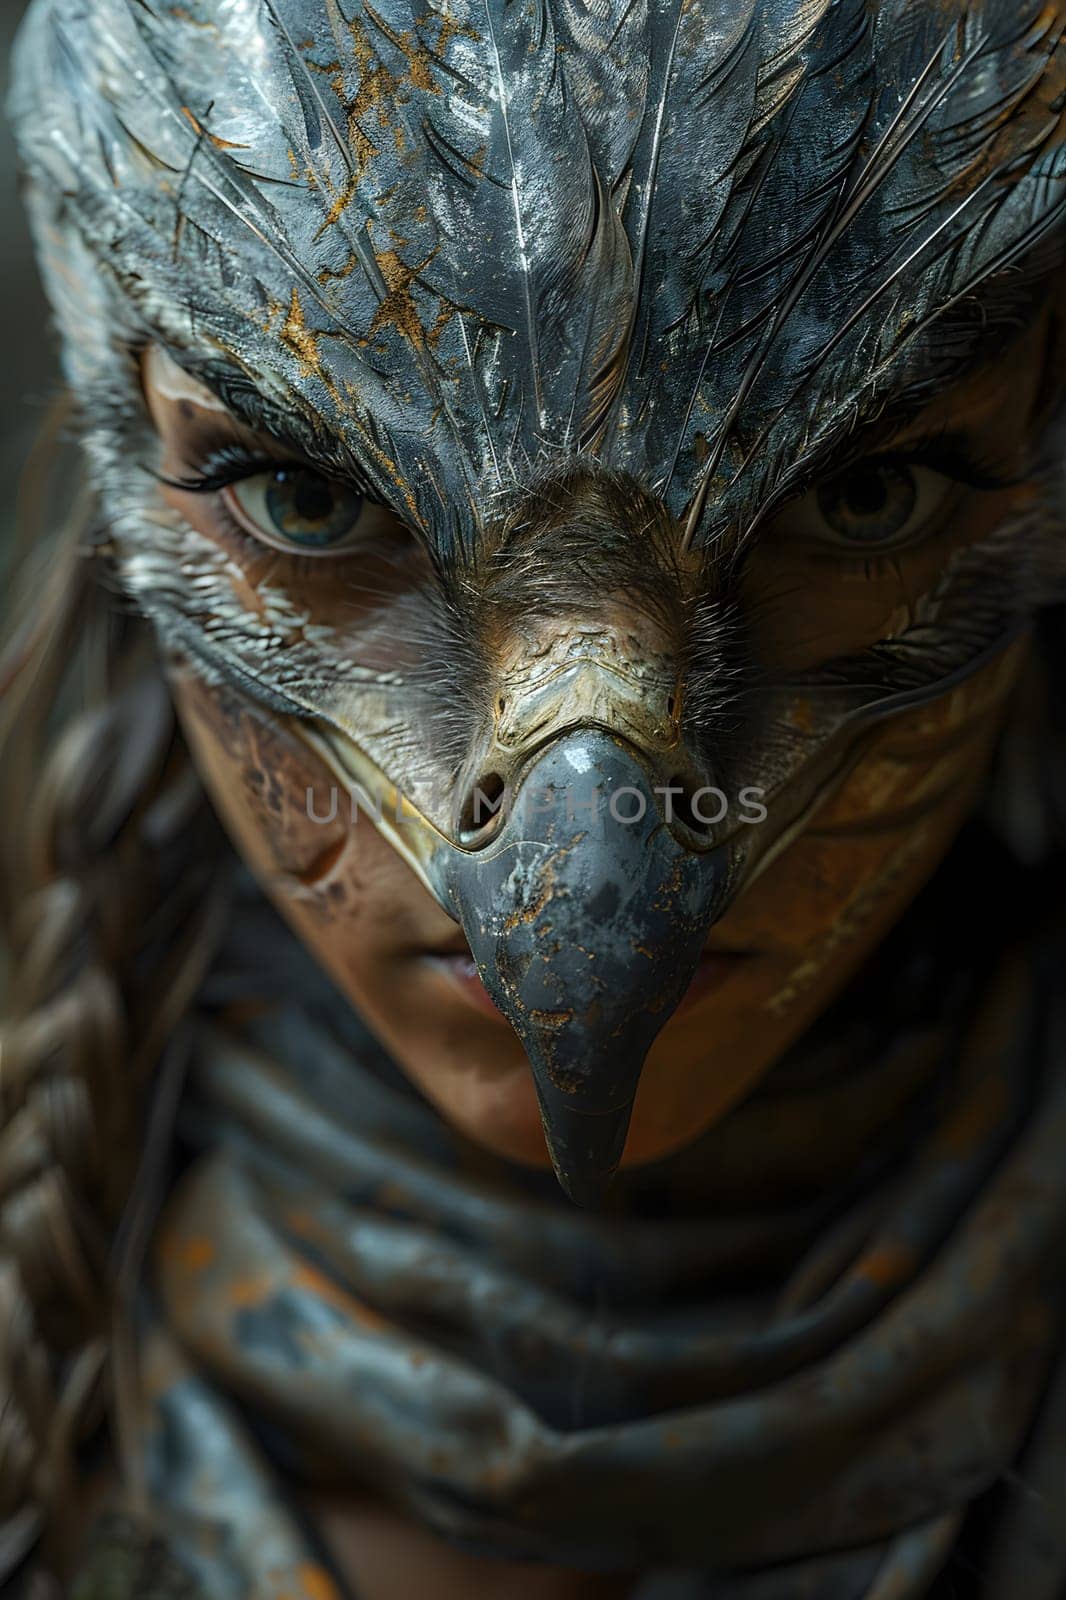 A close up of a person wearing a bird mask, showcasing intricate details like the wood texture, metal accents, and the wrinkled appearance around the eye and jaw area